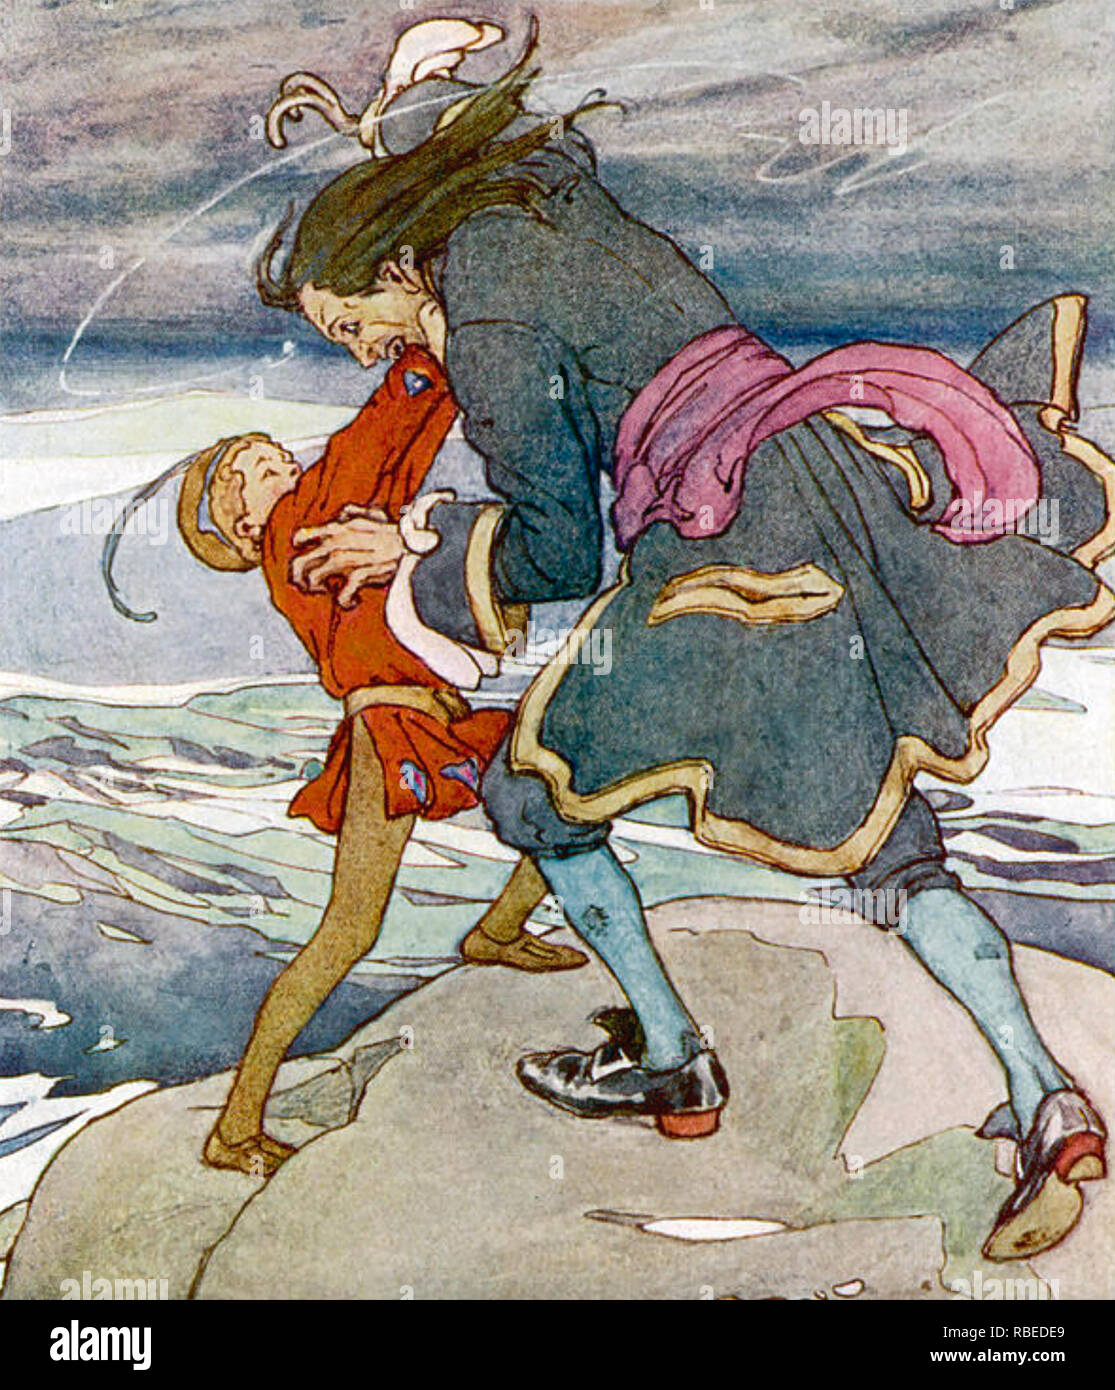 PETER PAN fights Captain Hook in a 1920s illustration of the characters created by J.M. Barrie Stock Photo